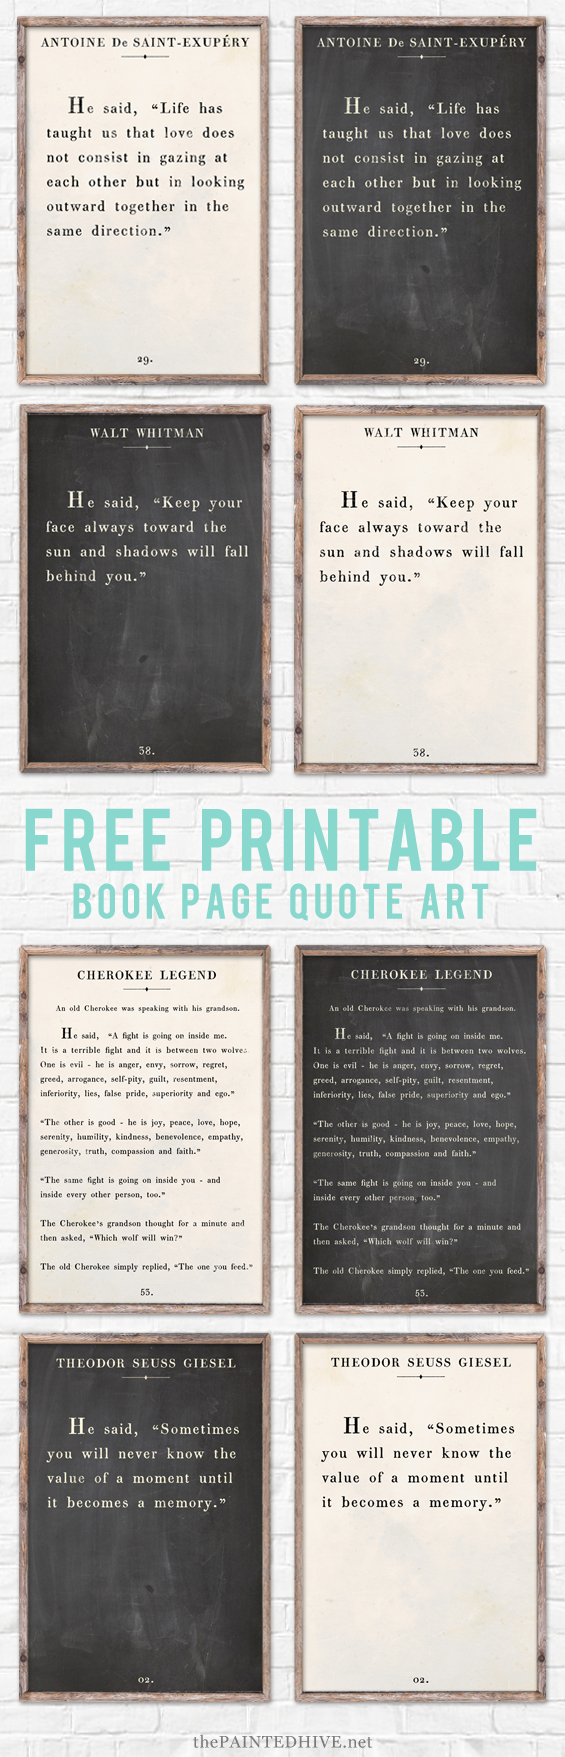 Free Printable Book Page Quote Page Art